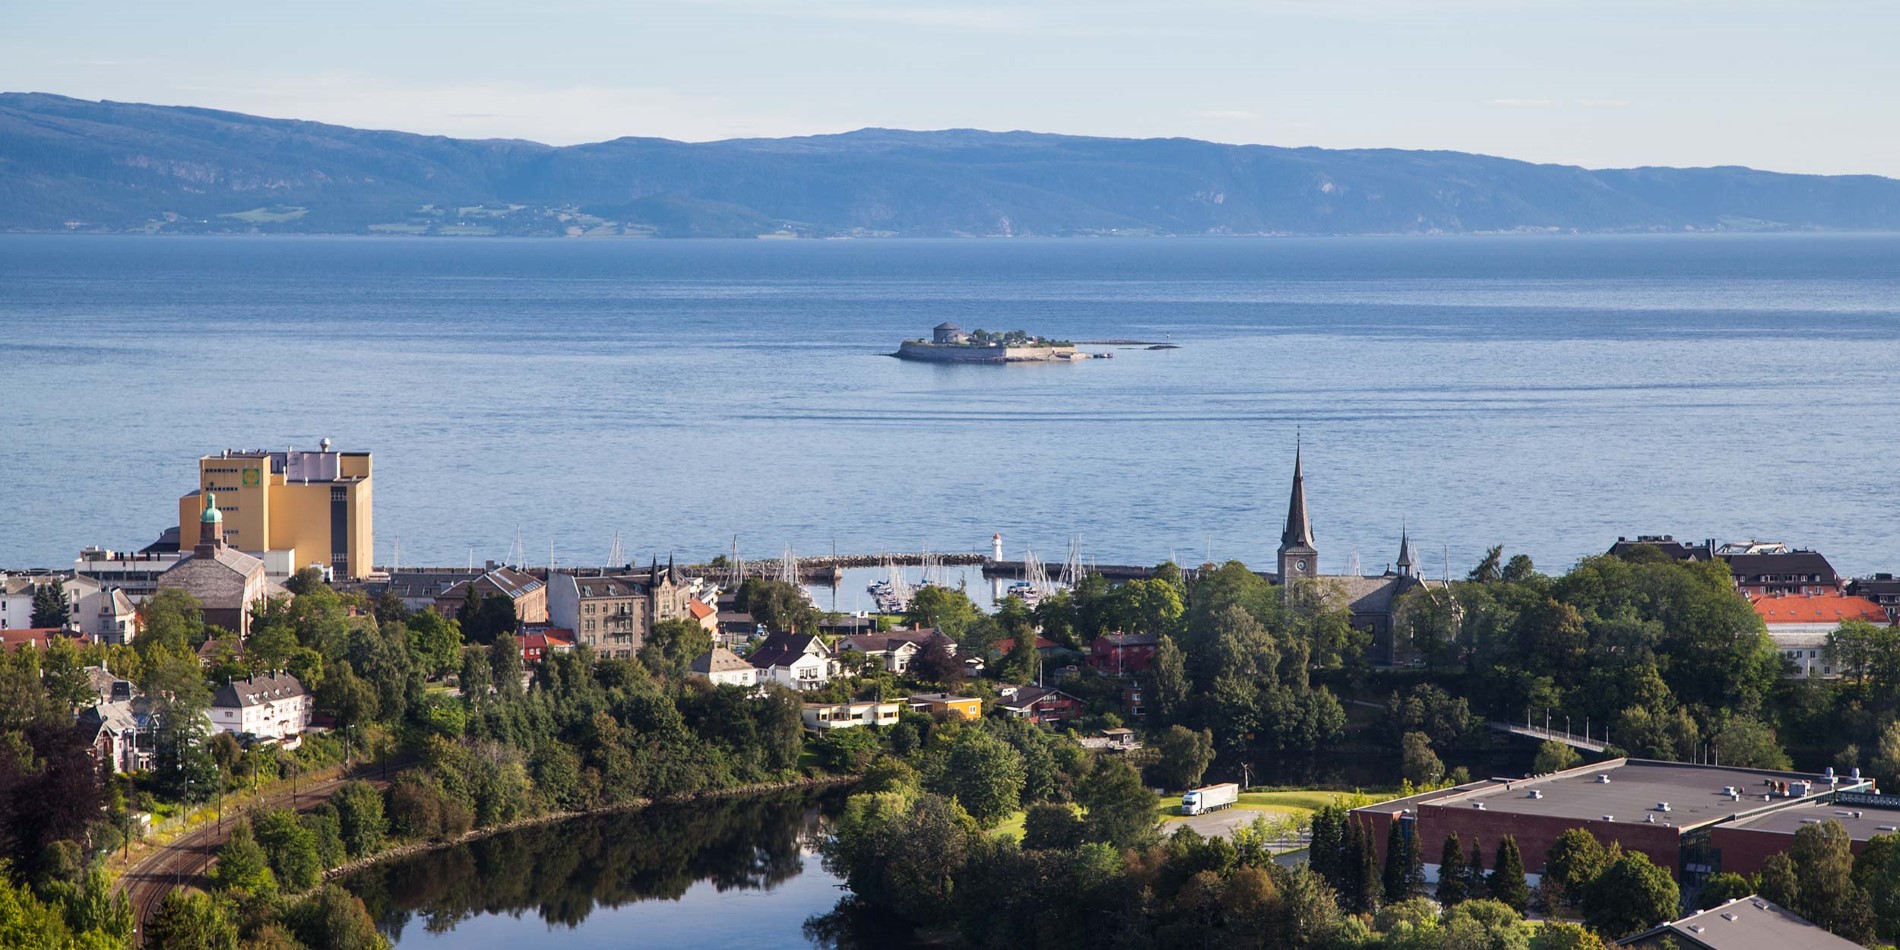 The Trondheimsfjord is Norway's third longest fjord